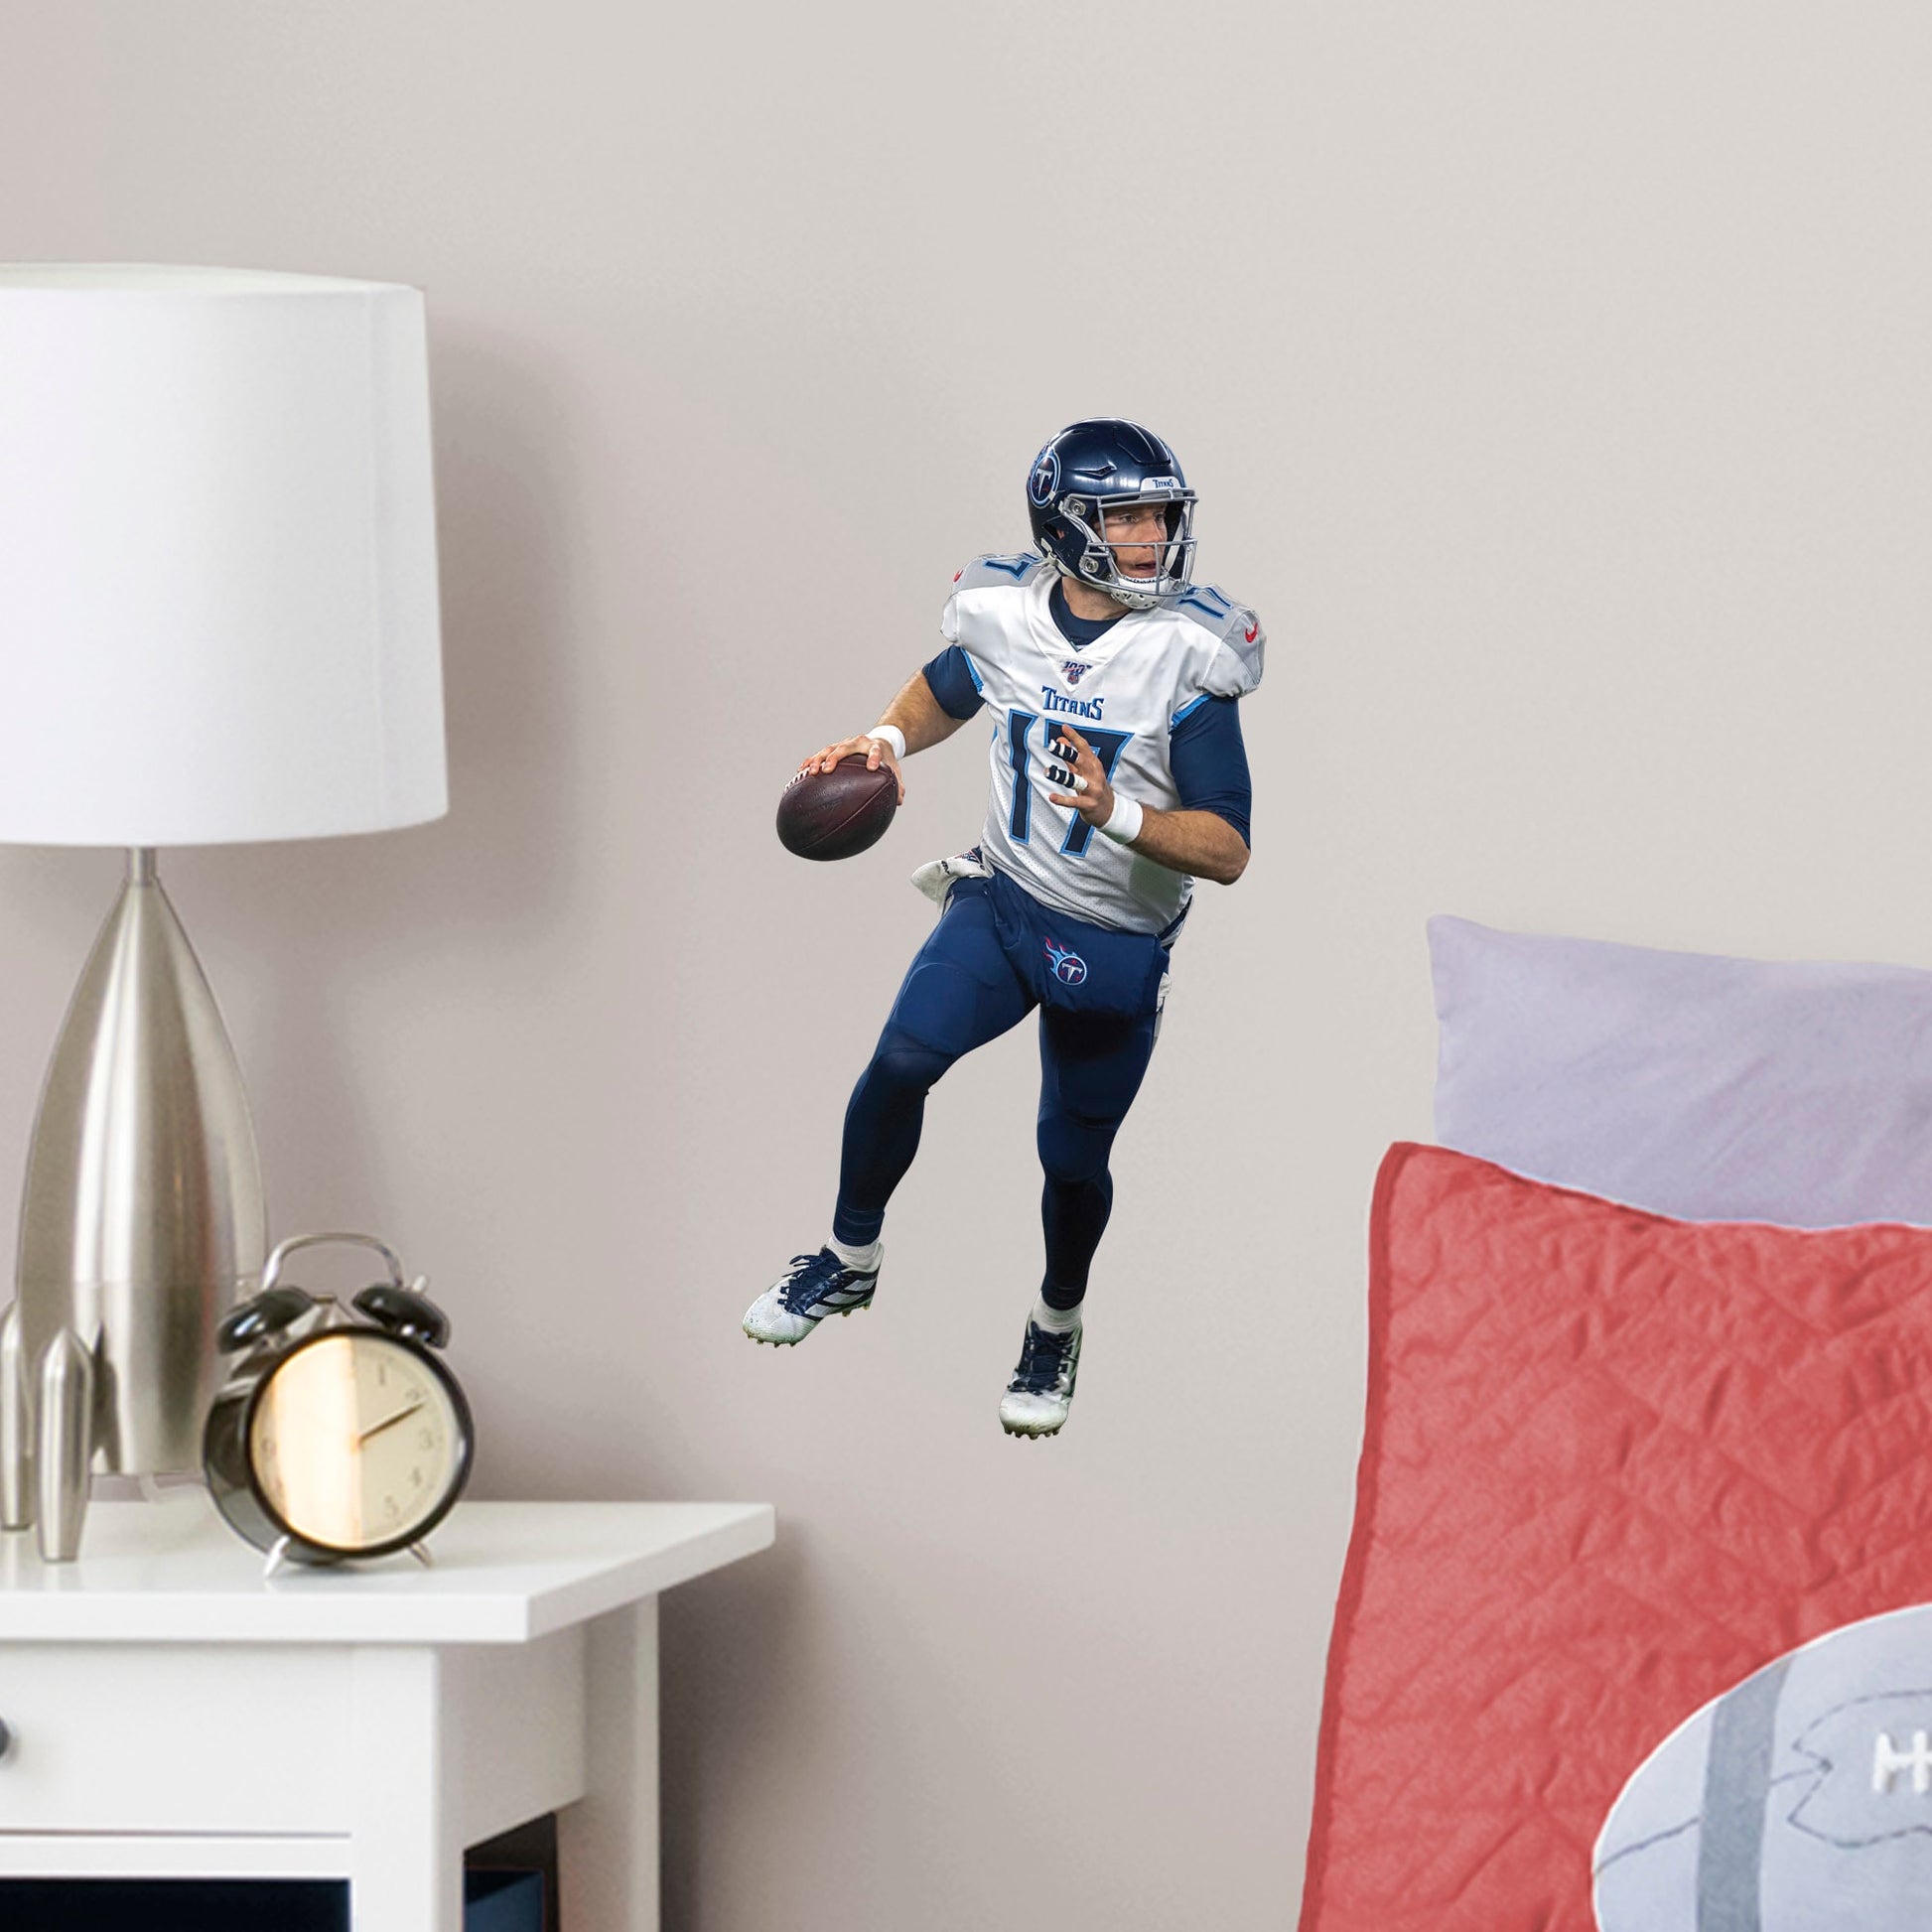 Large Athlete + 2 Decals (8"W x 16.5"H) Show off your support for the NFL 2019 Comeback Player of the Year, Ryan Tannehill, with this officially licensed wall decal of the Tennessee Titan quarterback. Considered one of the best quarterbacks in the NFL, Tannessee is geared up to complete the pass and dominate the AFC South in any bedroom, sports bar, or fan cave with this high-quality wall decal in the iconic Titans navy blue and silver uniform. Nashville isn't just for music, let’s go Titans!